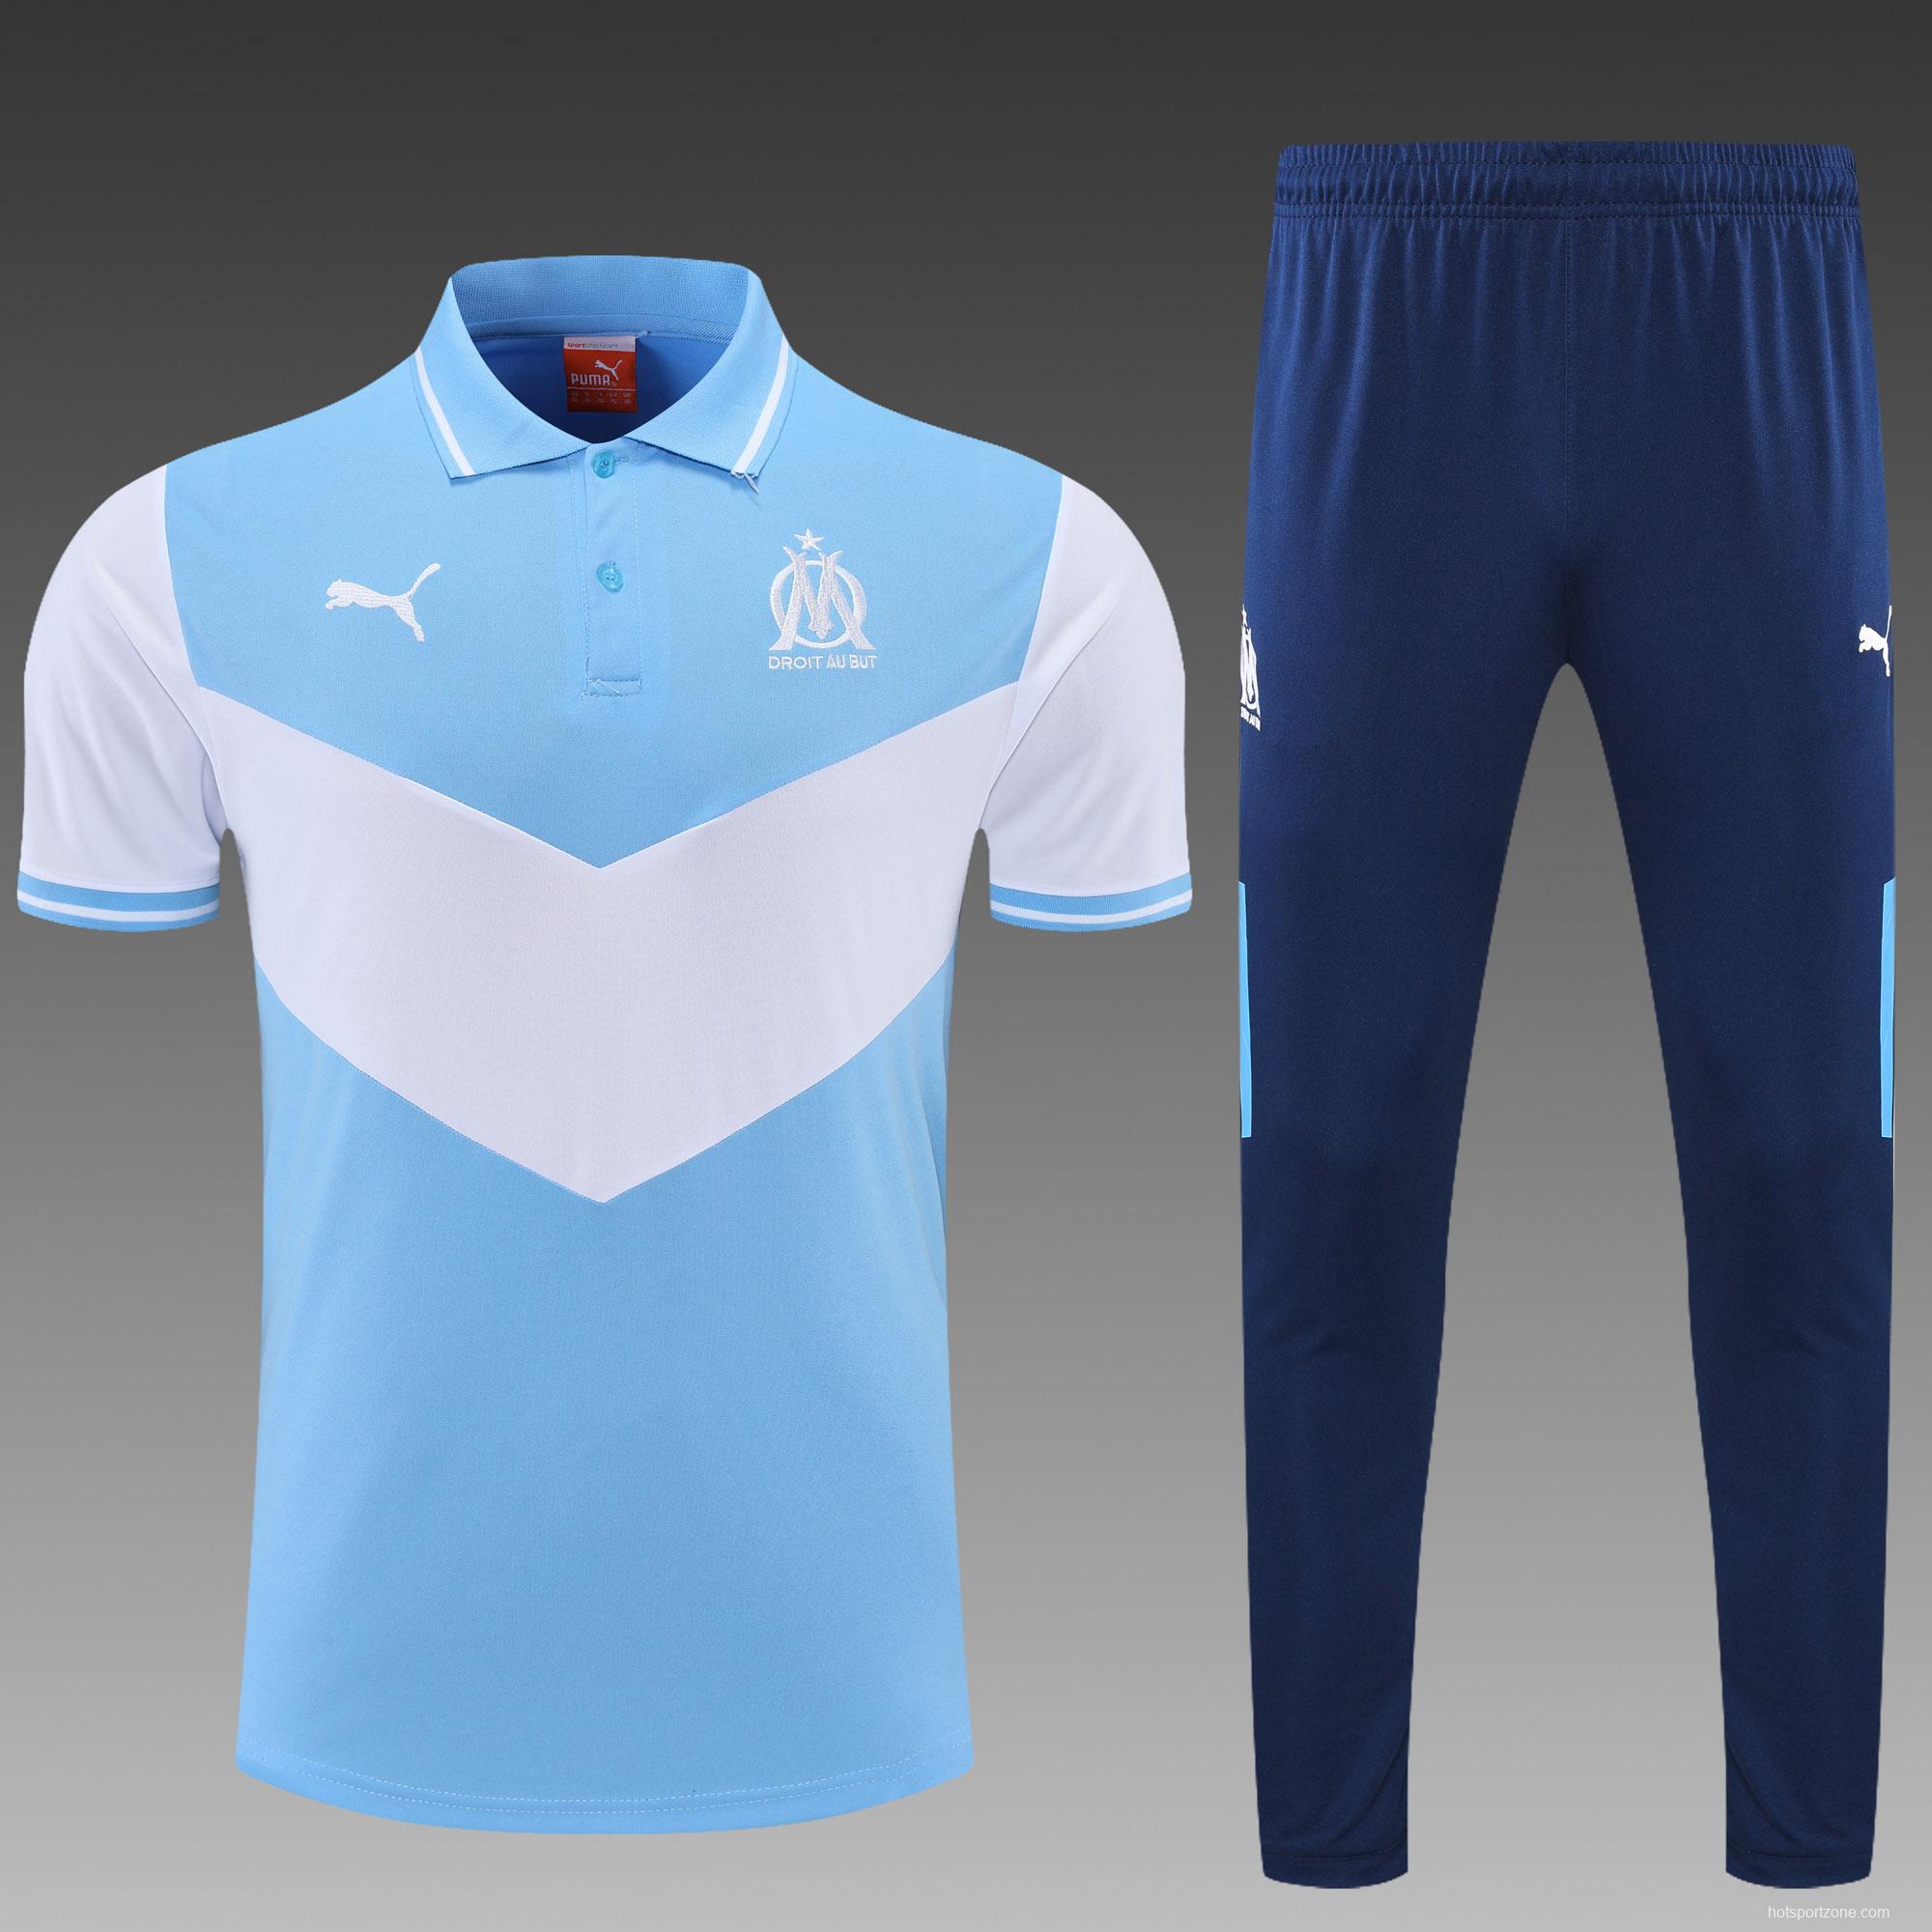 Olympique de Marseille POLO kit blue and white (not sold separately)